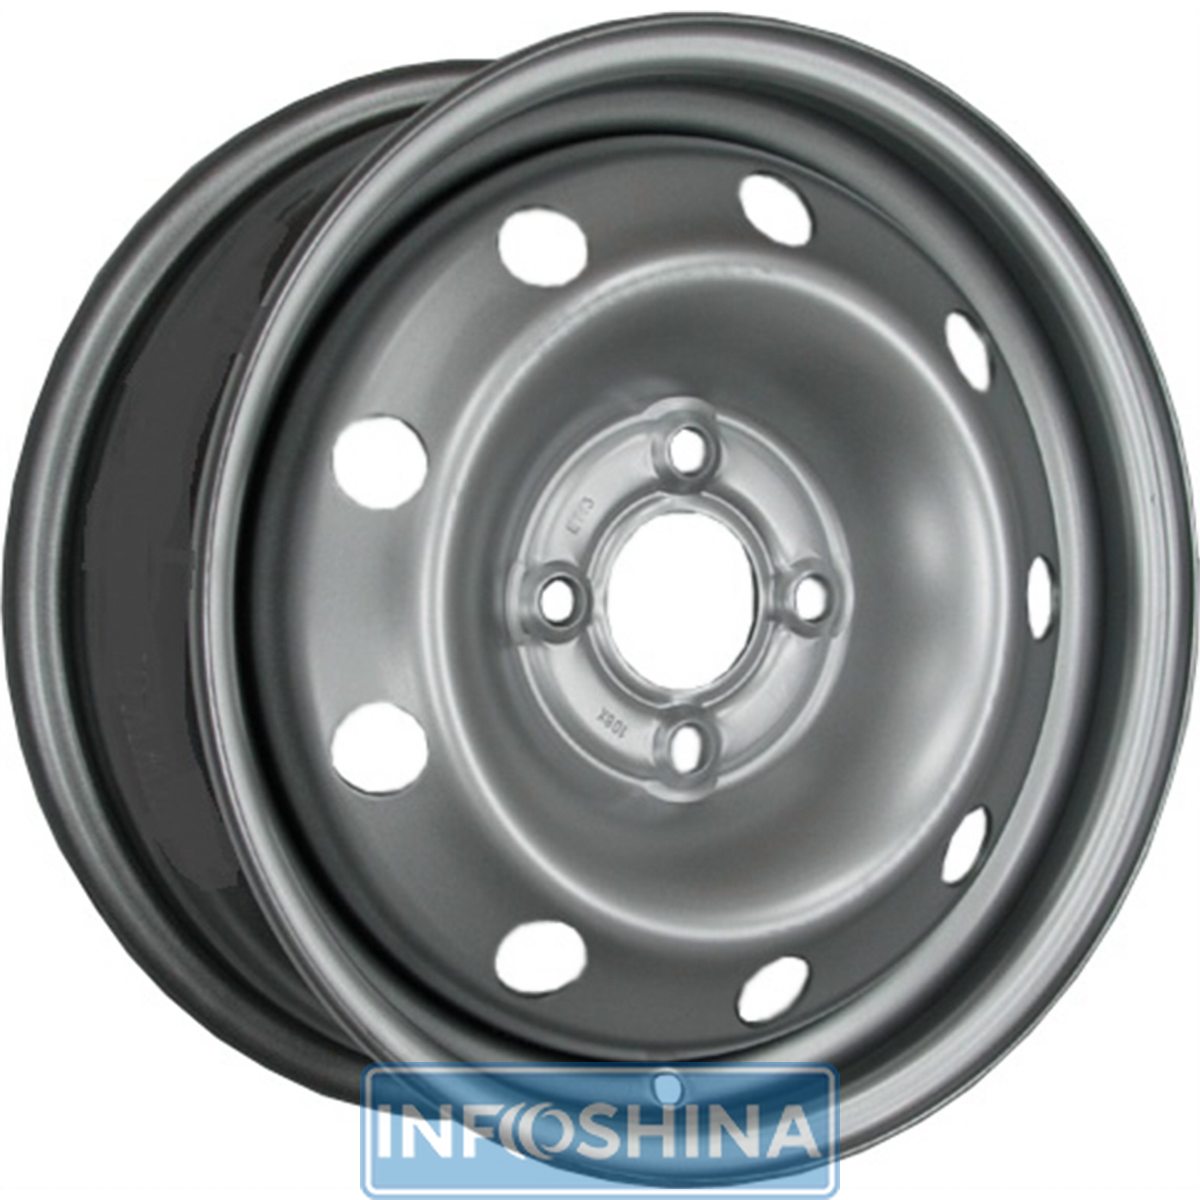 Magnetto Wheels 14013 S